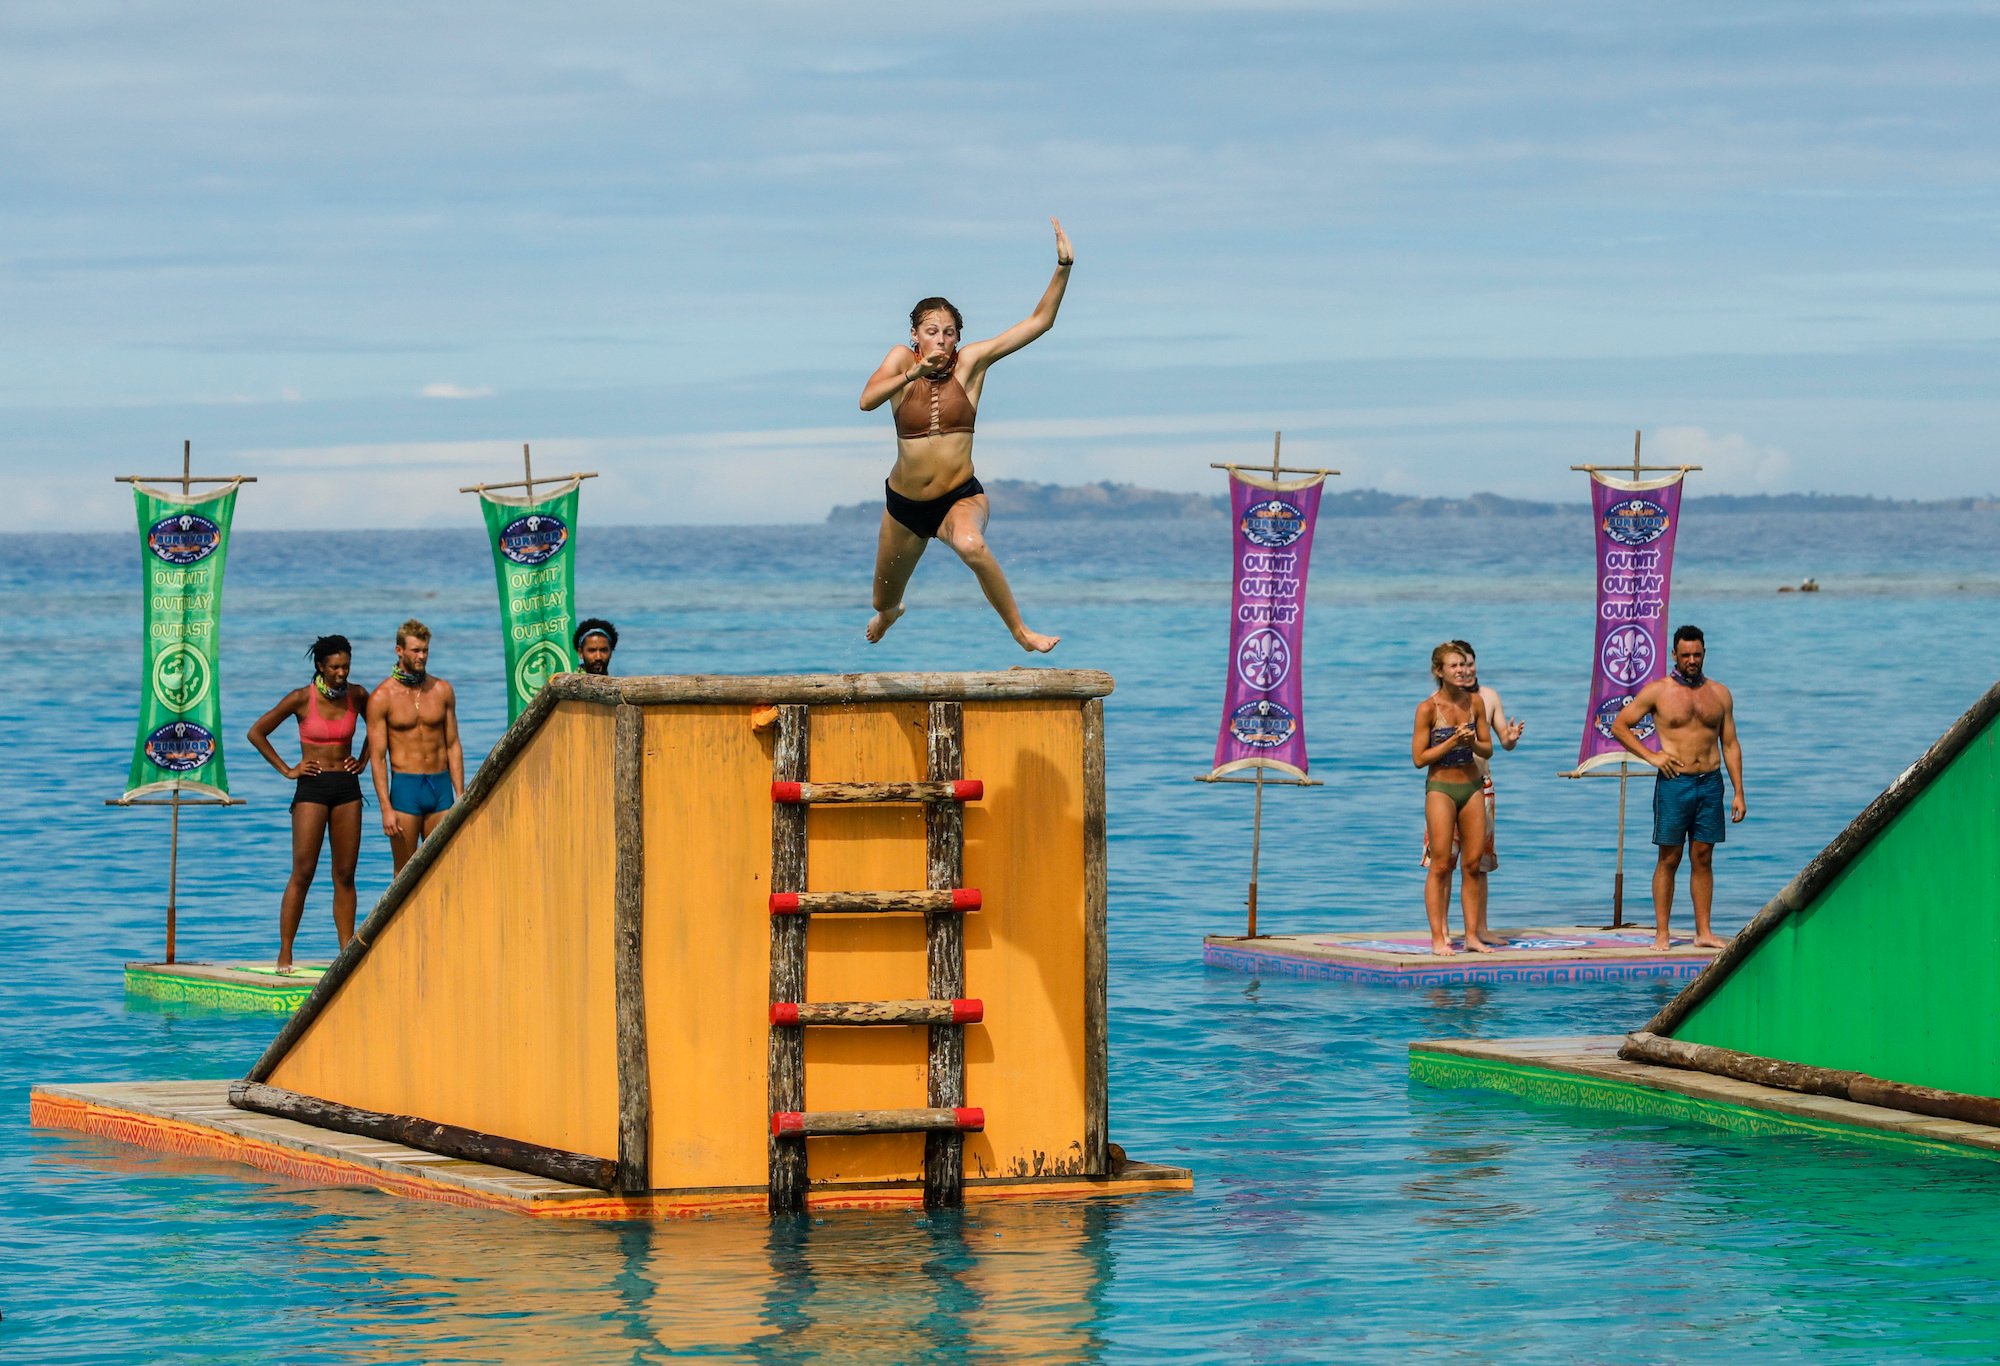 Survivor contestants competing on the show, in the water, with one contestant jumping off a platform